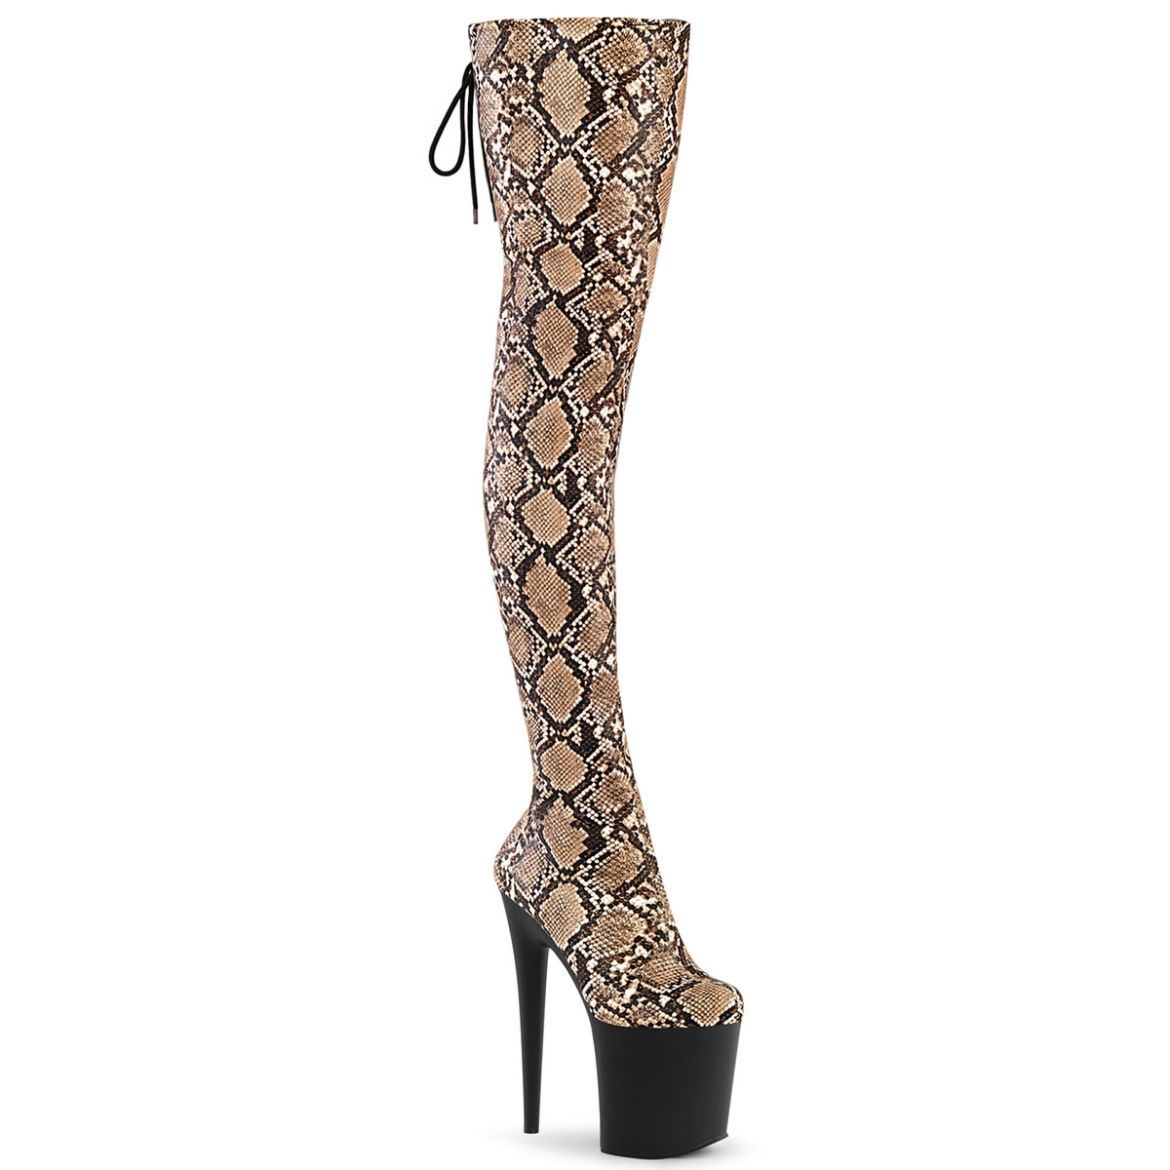 Product image of Pleaser FLAMINGO-3008SP-BT Tan-Brown Snake Print/Blk Matte 8 Inch Heel 4 Inch PF Stretch Snake Print Pull-On Thigh Boot